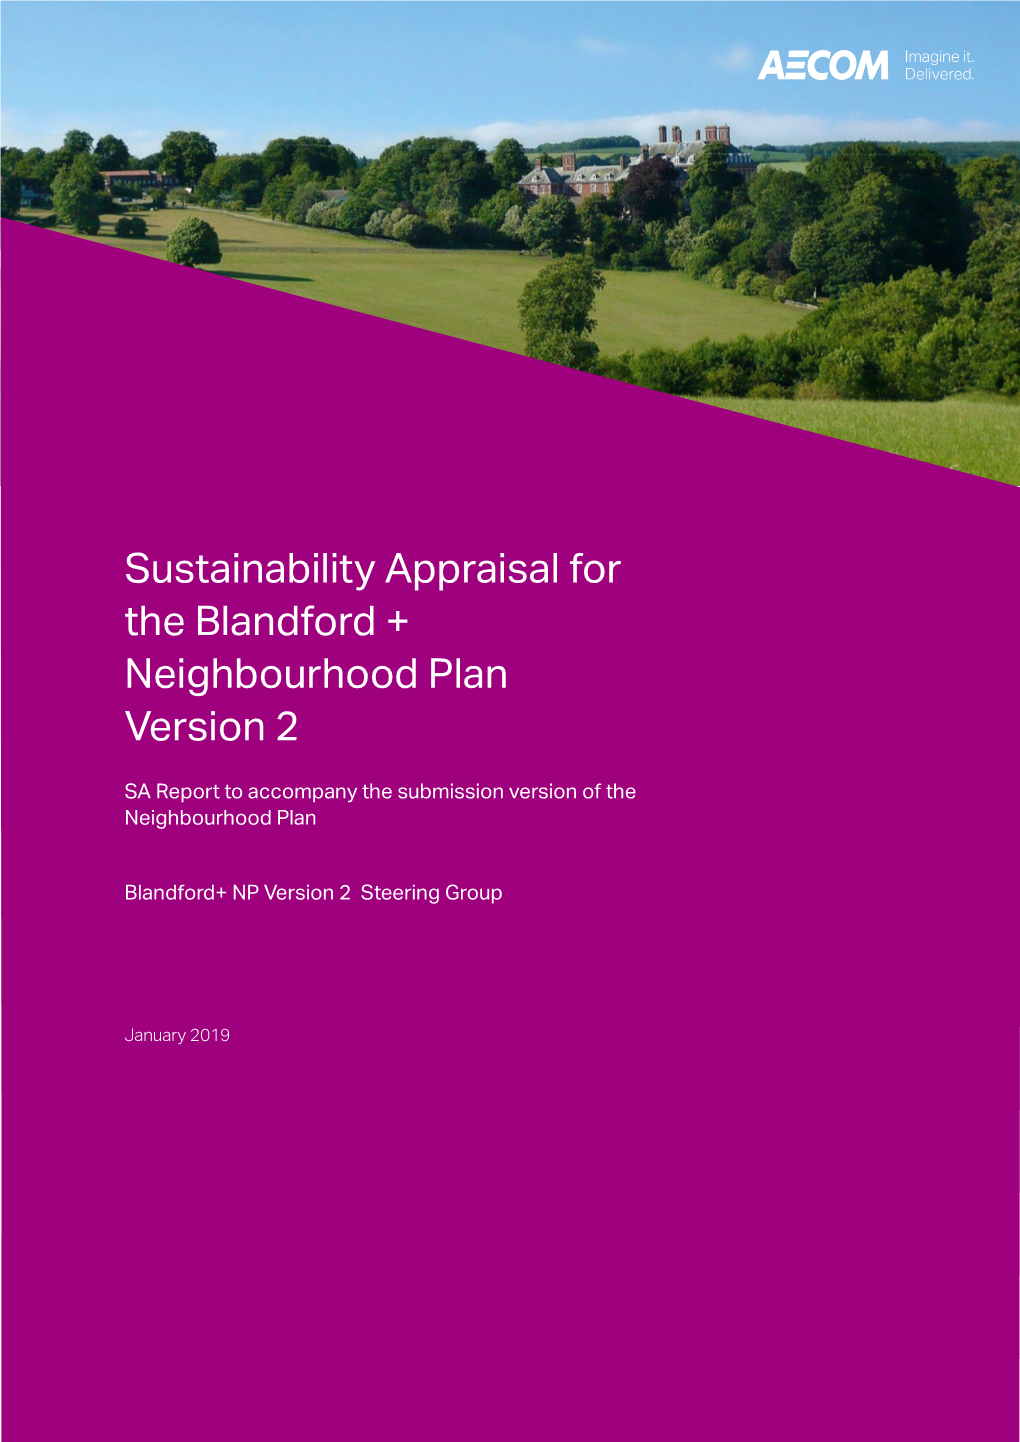 Report Sustainability Appraisal for the Blandford+ Neighbourhood